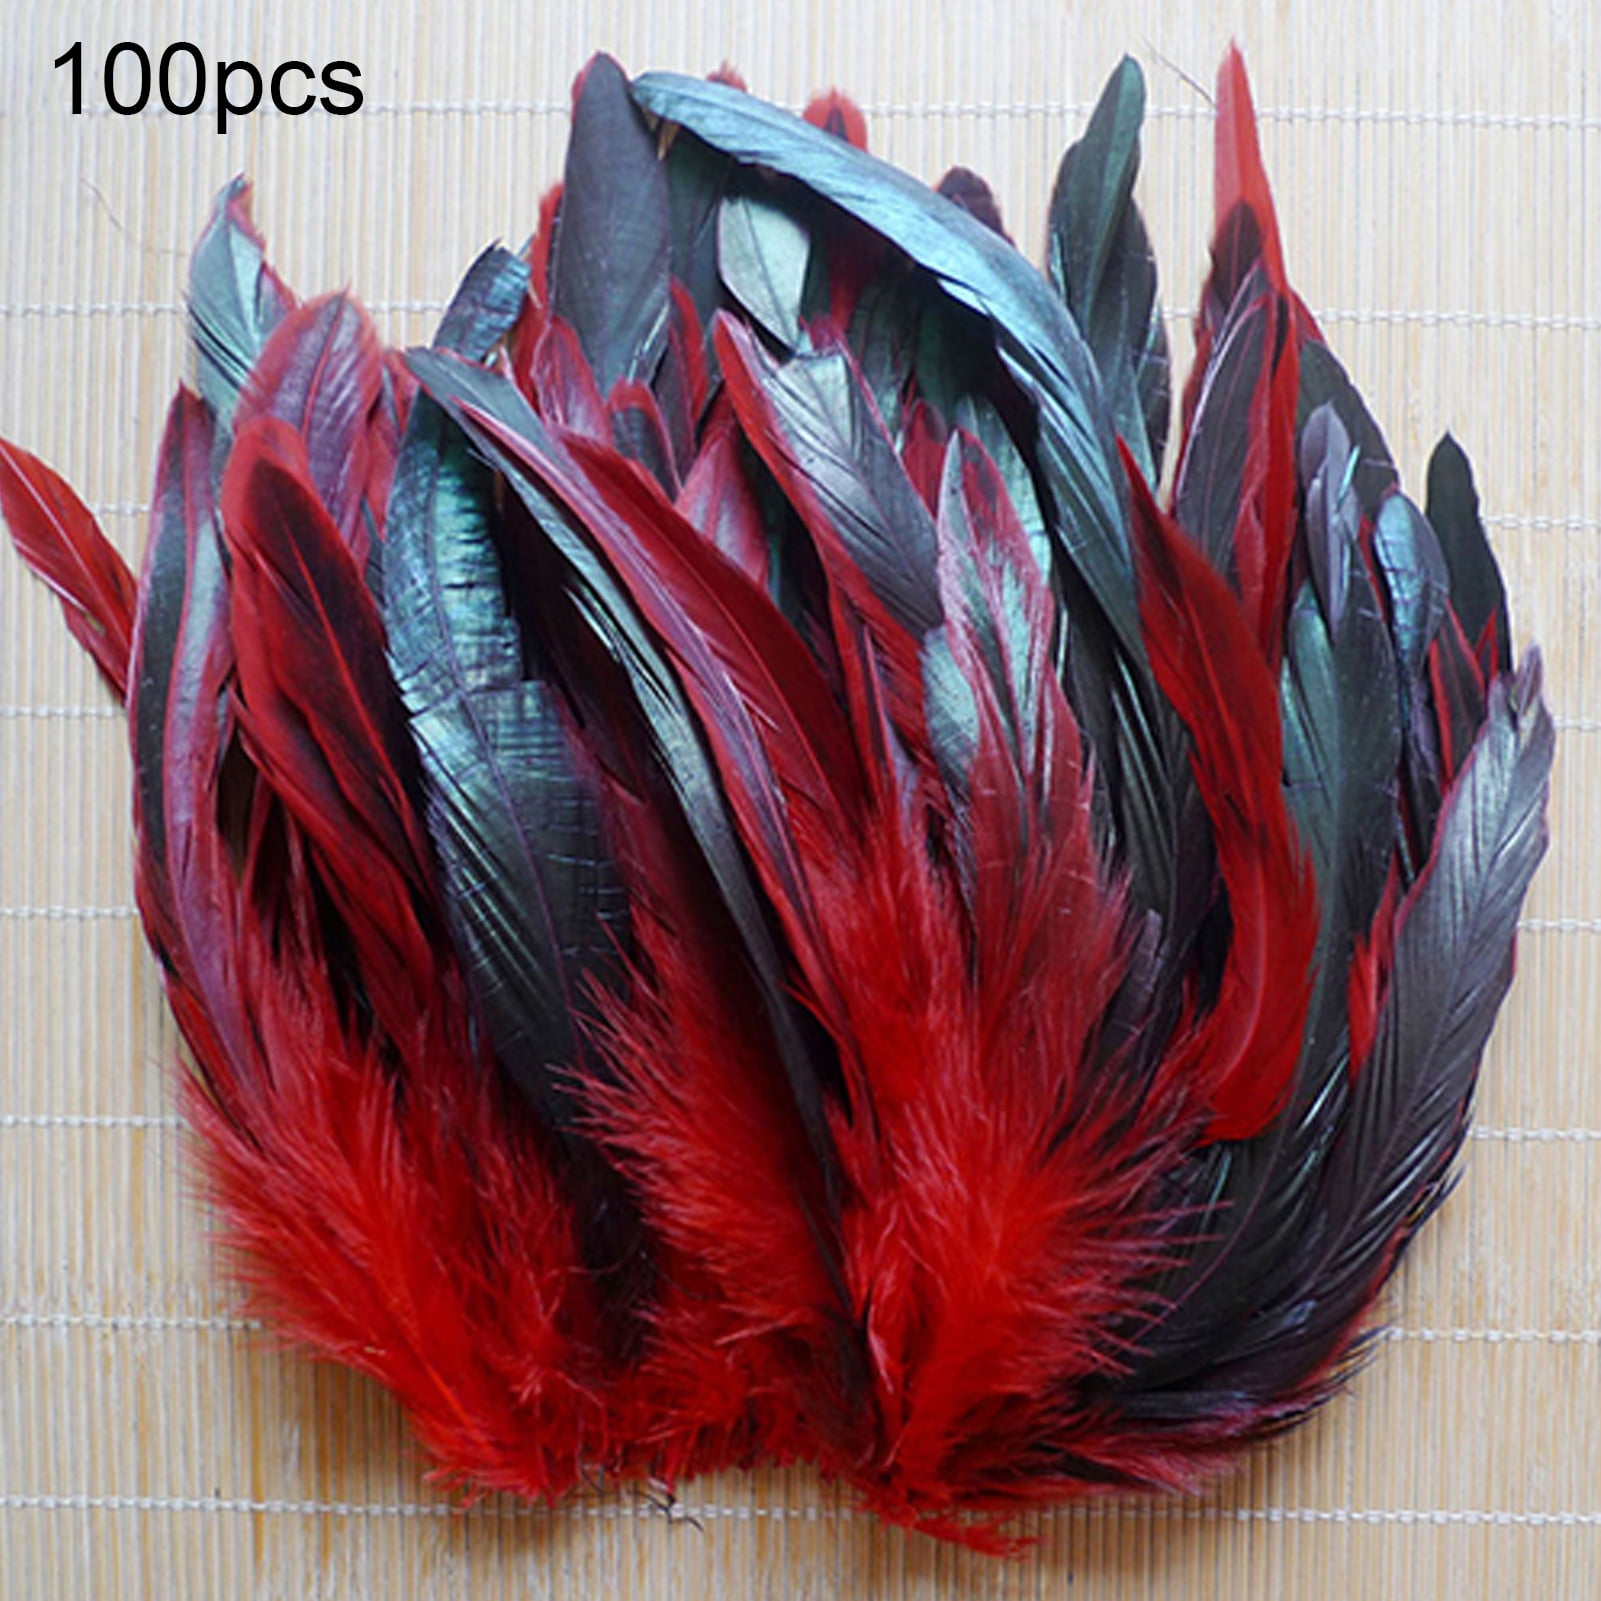 Wholesale Rooster Tail Feathers 100pcs 25-45CM /10-18inch Natural Plumes  Black Red DIY Cock Clothing Jewelry Accessories Party - AliExpress